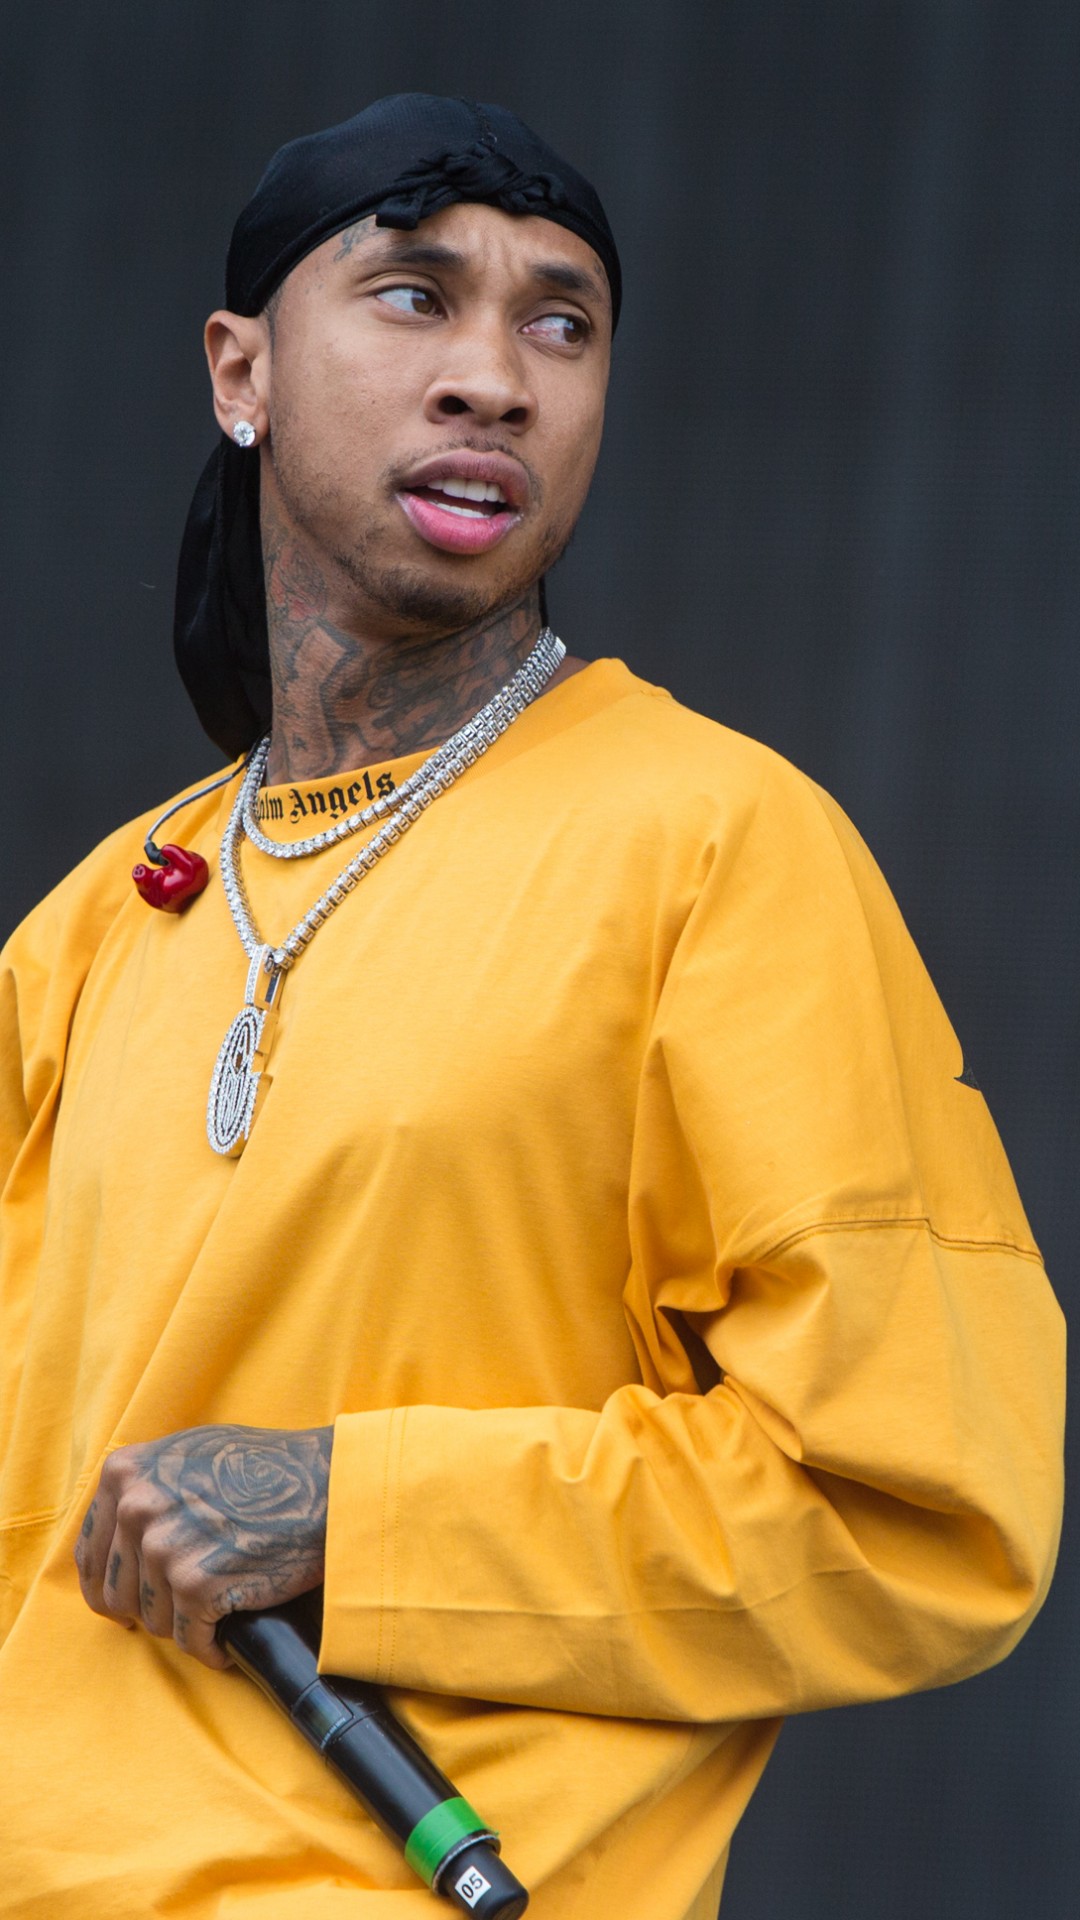 Download wallpapers Tyga, 2020, 4k, yellow neon lights, american rapper,  music stars, creative, Tyga with microphone, Michael Ray Nguyen-Stevenson,  american celebrity, Tyga 4K for desktop free. Pictures for desktop free